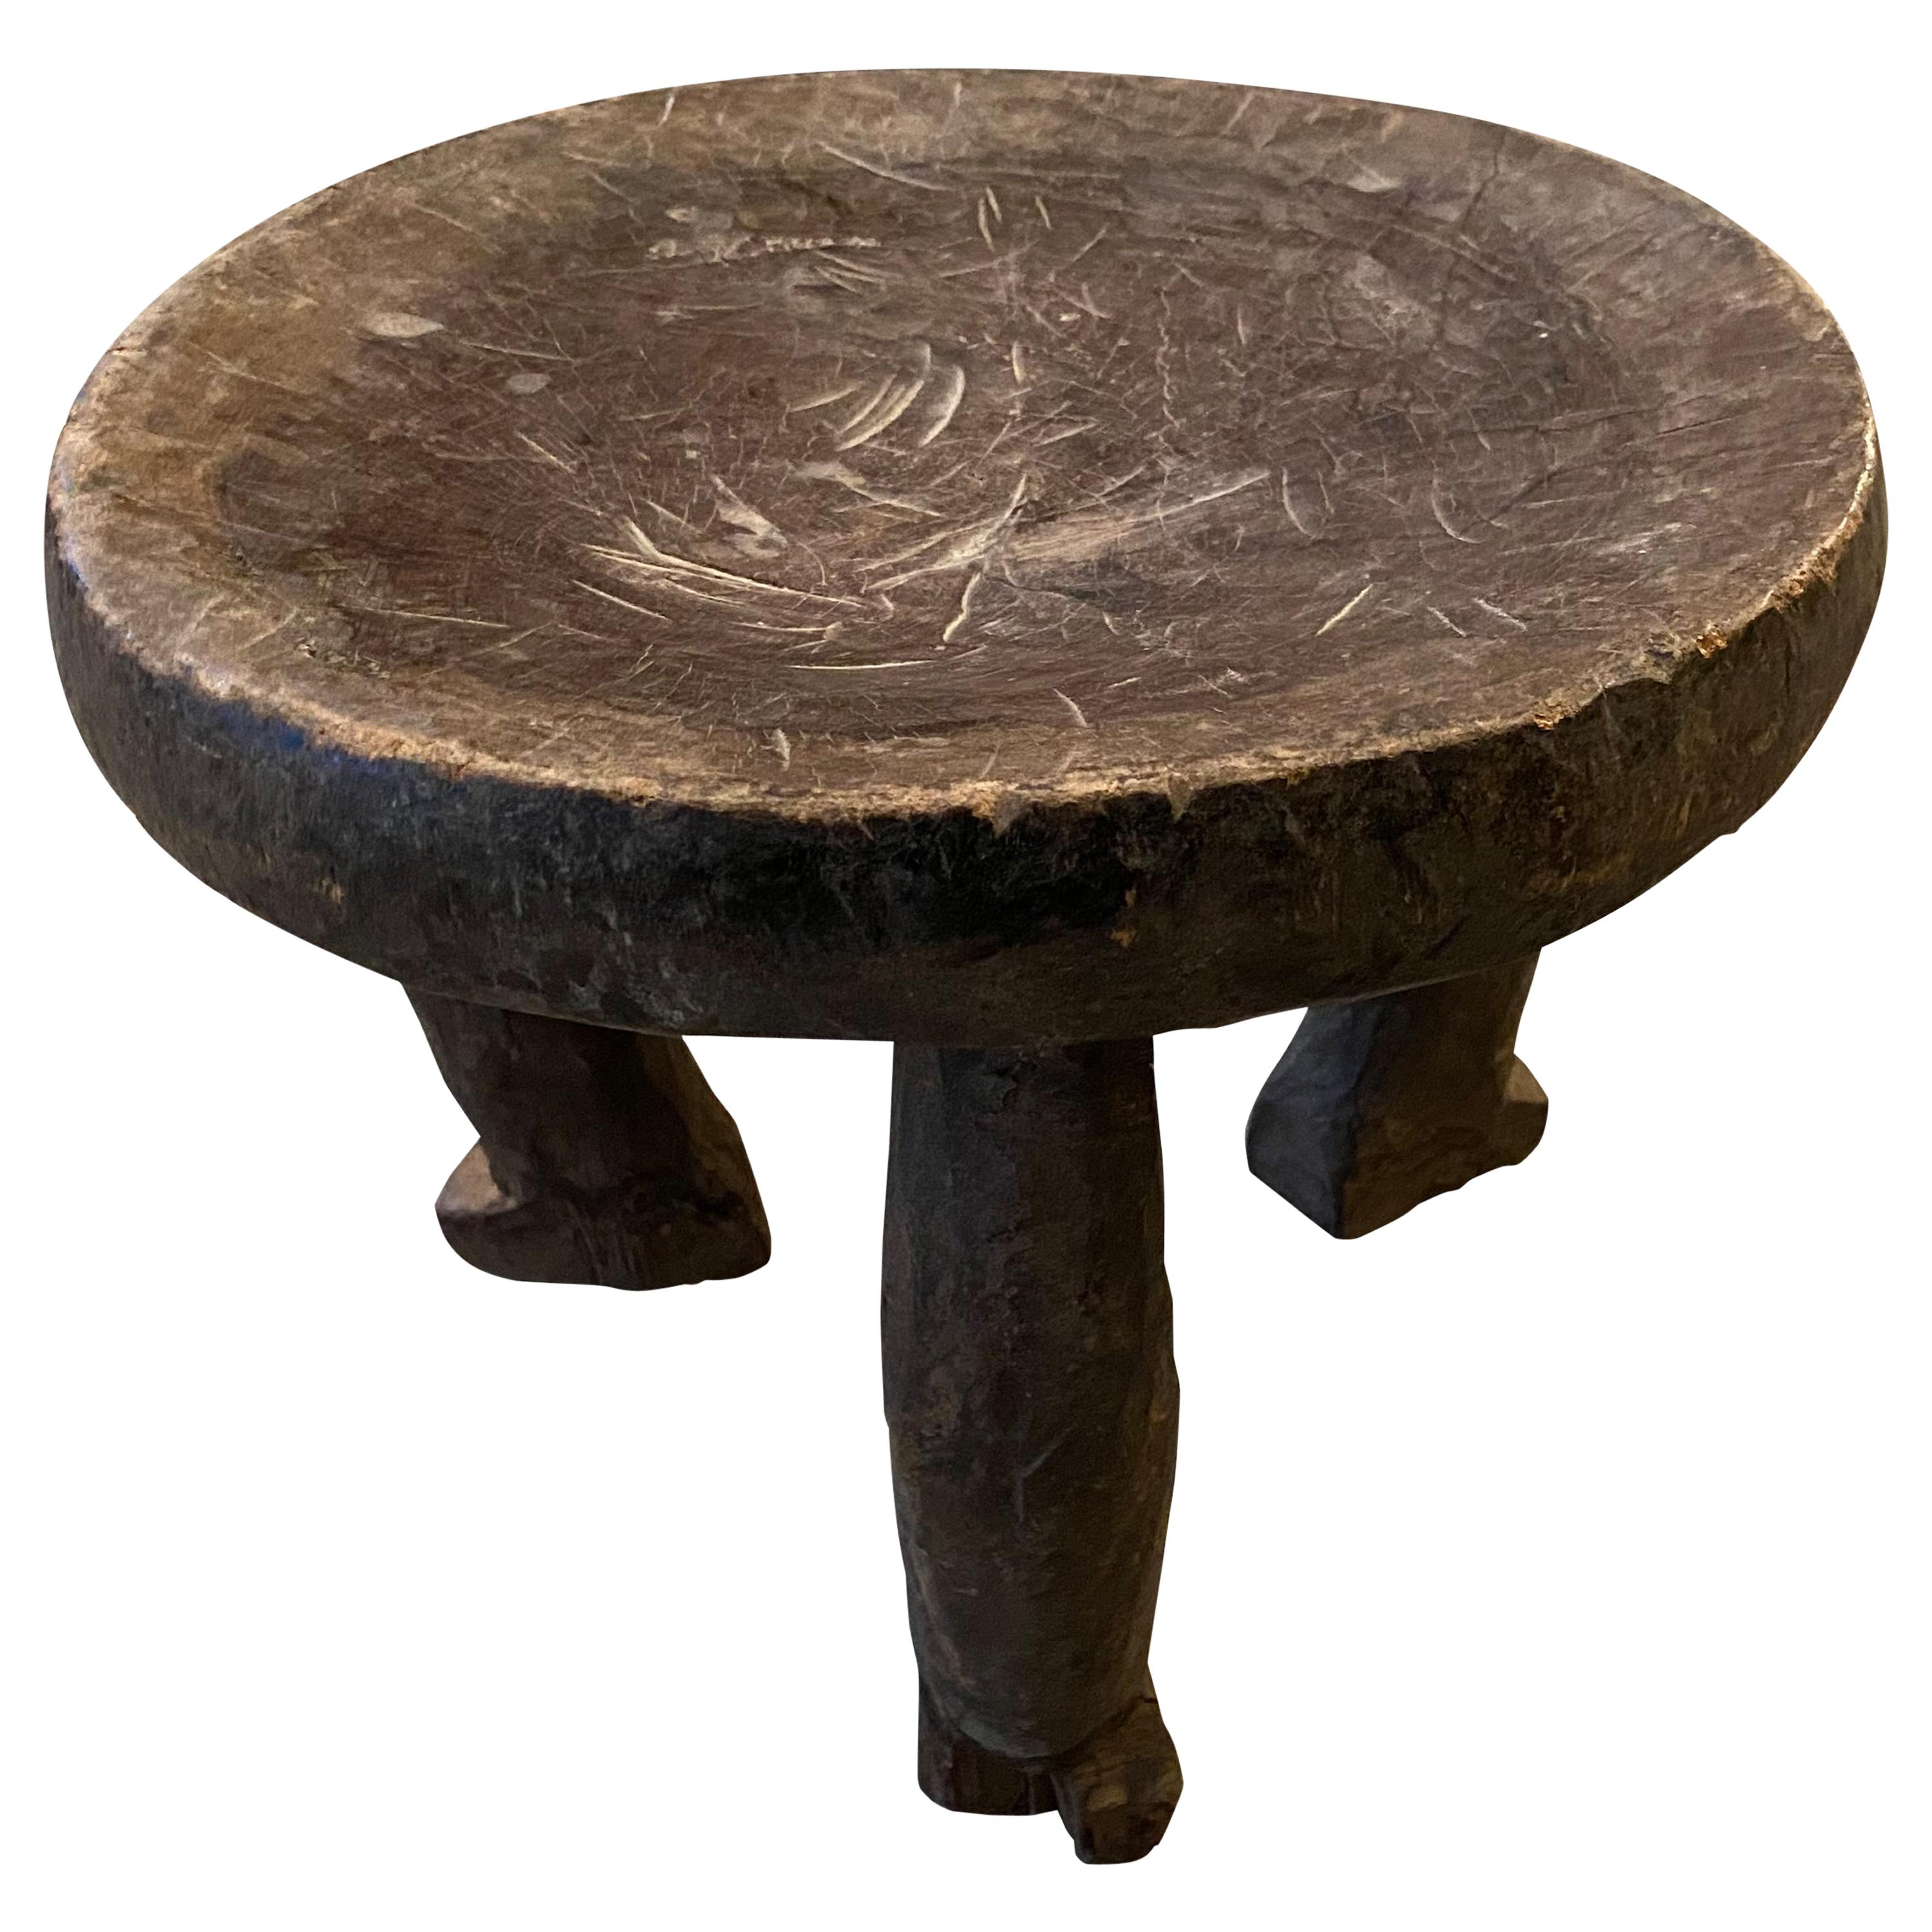 Andrianna Shamaris Antique Wood African Stool or Side Table